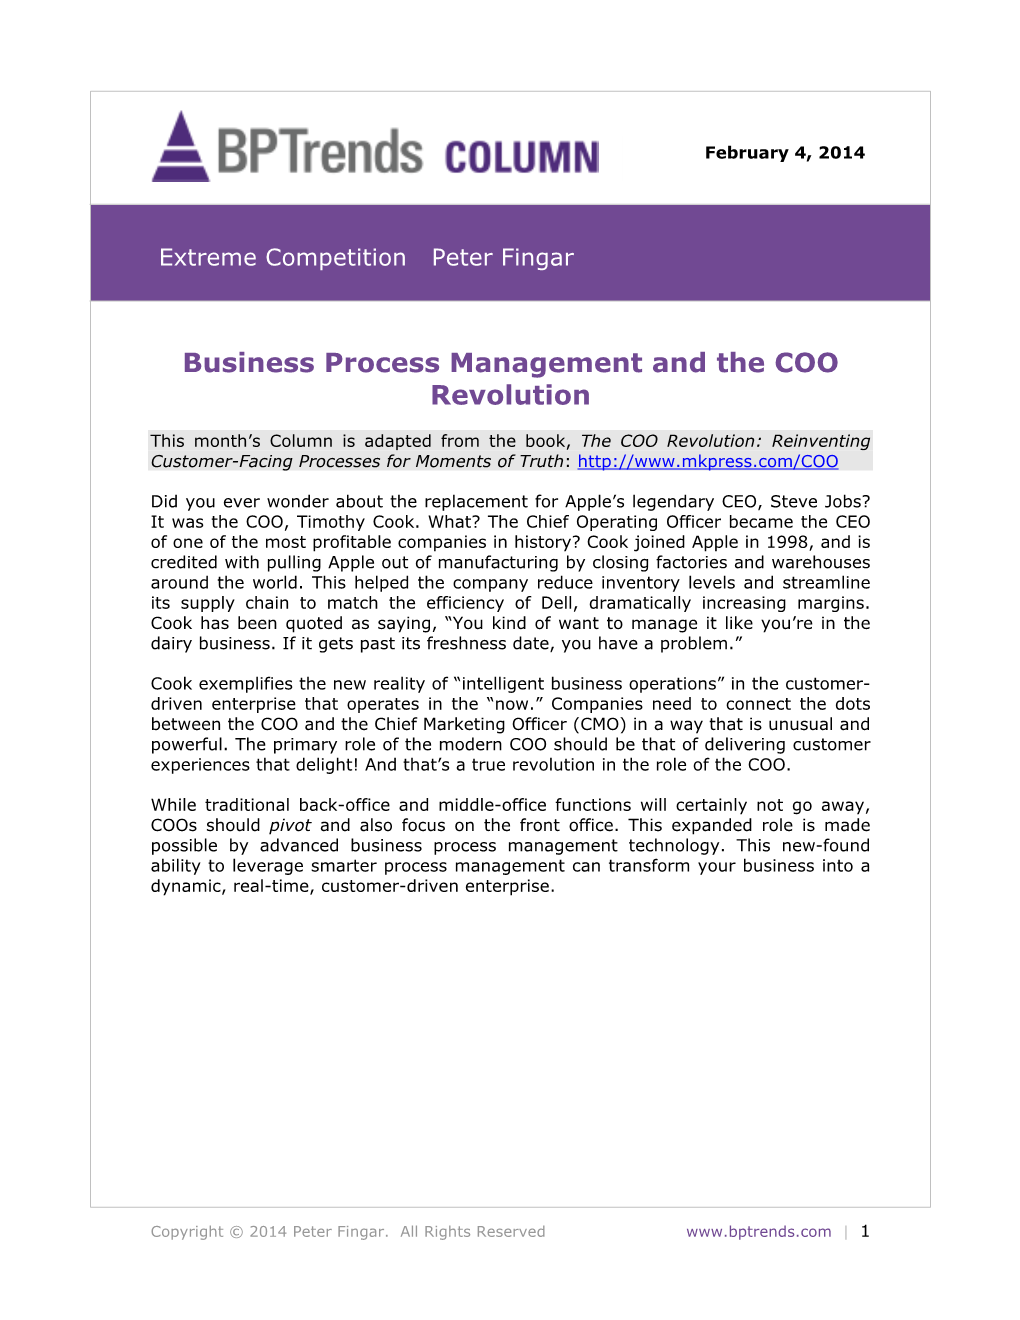 Business Process Management and the COO Revolution